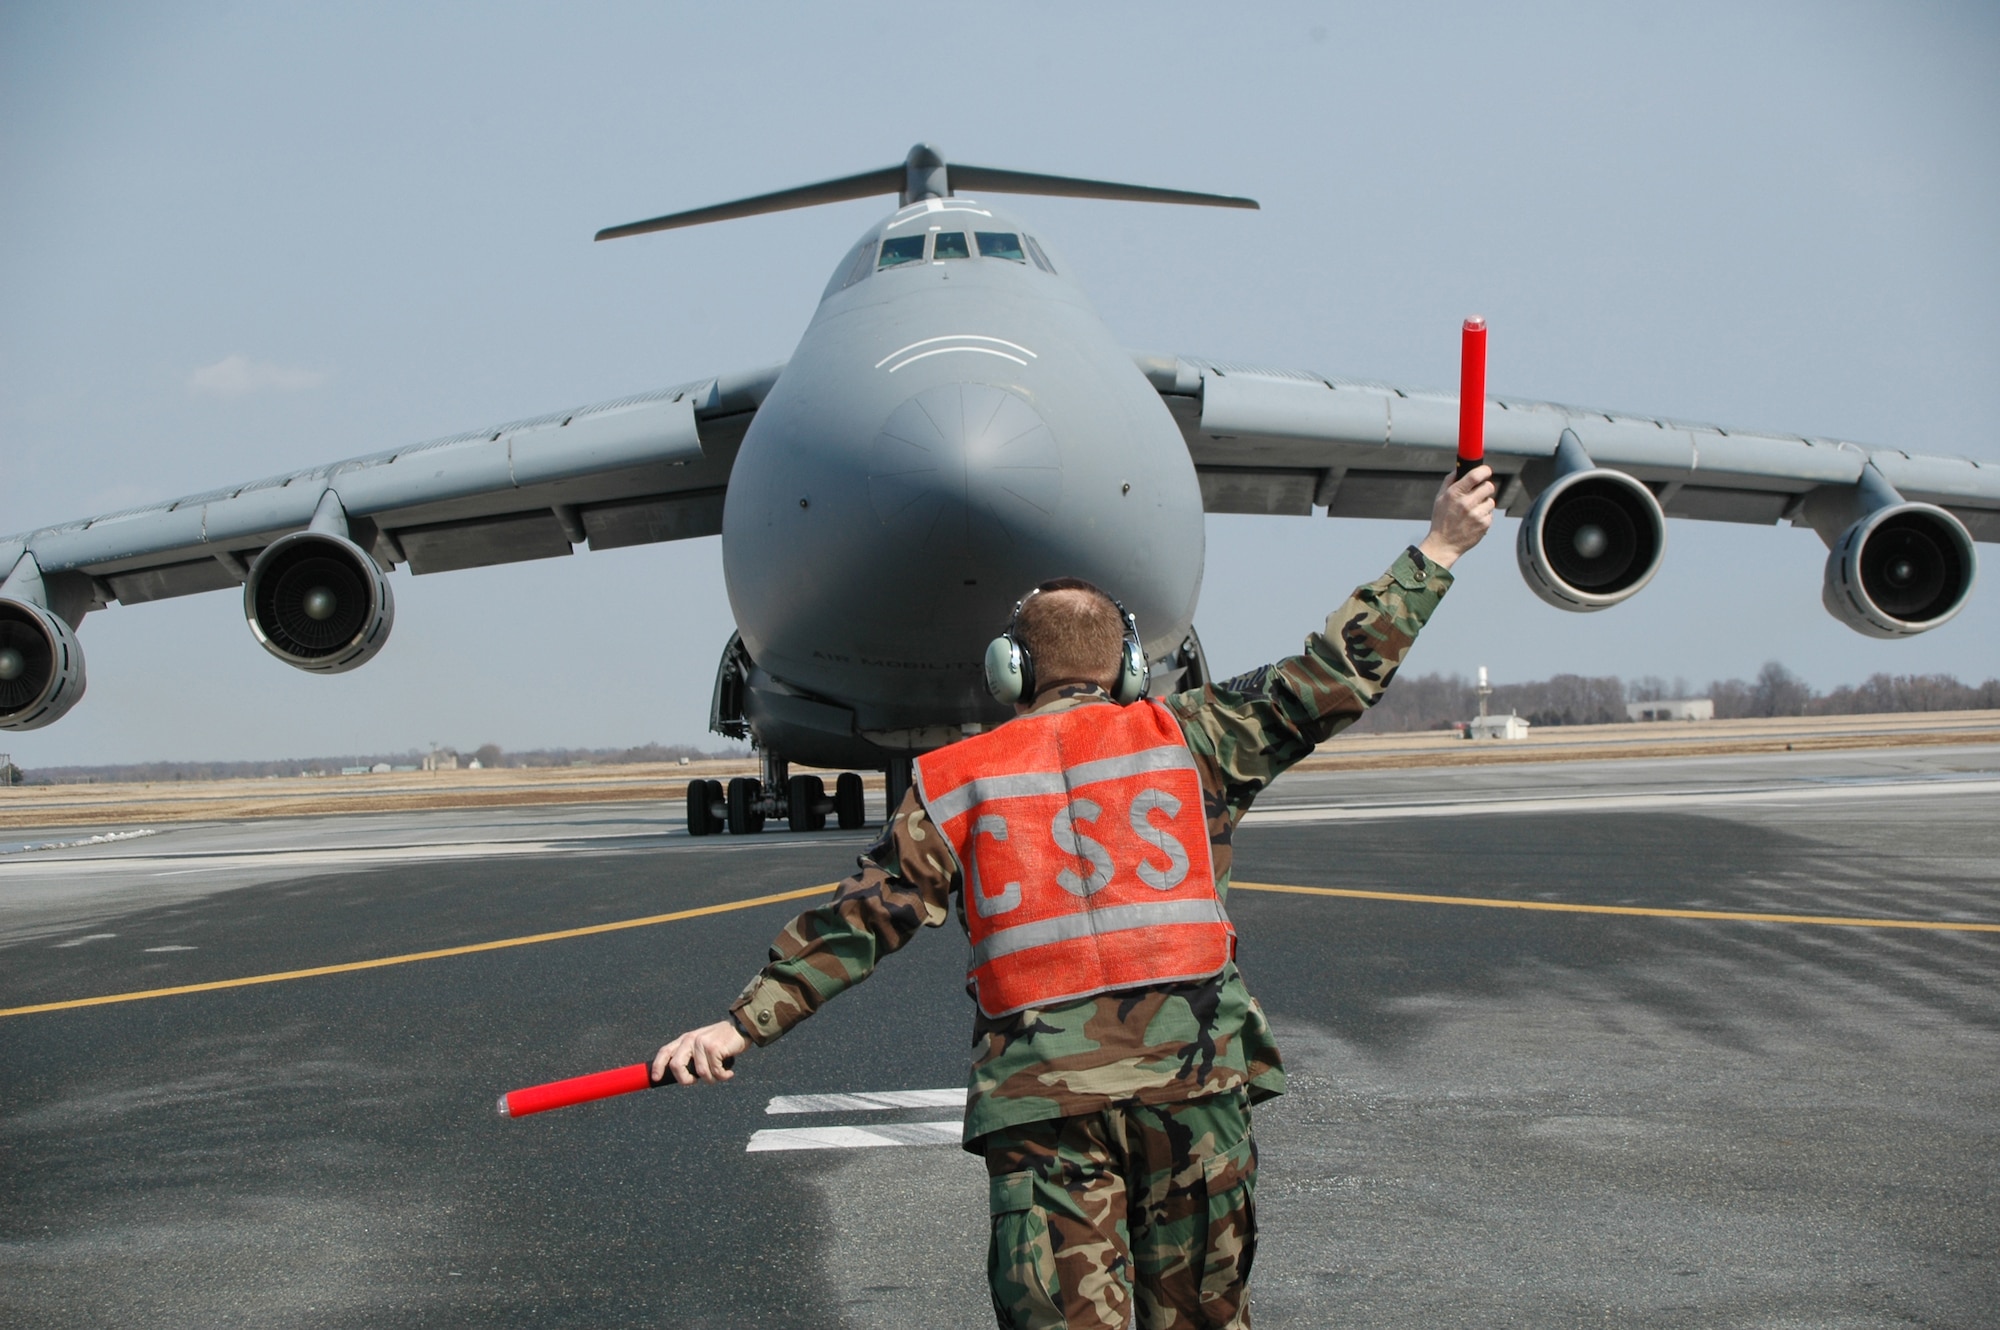 Tech. Sgt. James Baker, 512th Aircraft Maintenance Squadron, gives the "all clear" for the 326th Airlift Squadron crew to park on the Dover Air Force Base, Del., runway March 10. It was the last C-5 Galaxy flight for the 326th AS, a unit in the Air Force Reserve Command's 512th Airlift Wing. The squadron, which has been fliying the C-5 since 1973, is transitioning to the C-17 Globemaster III, scheduled to arrive in June. (U.S. Air Force photo/Tech. Sgt. Veronica A. Aceveda)